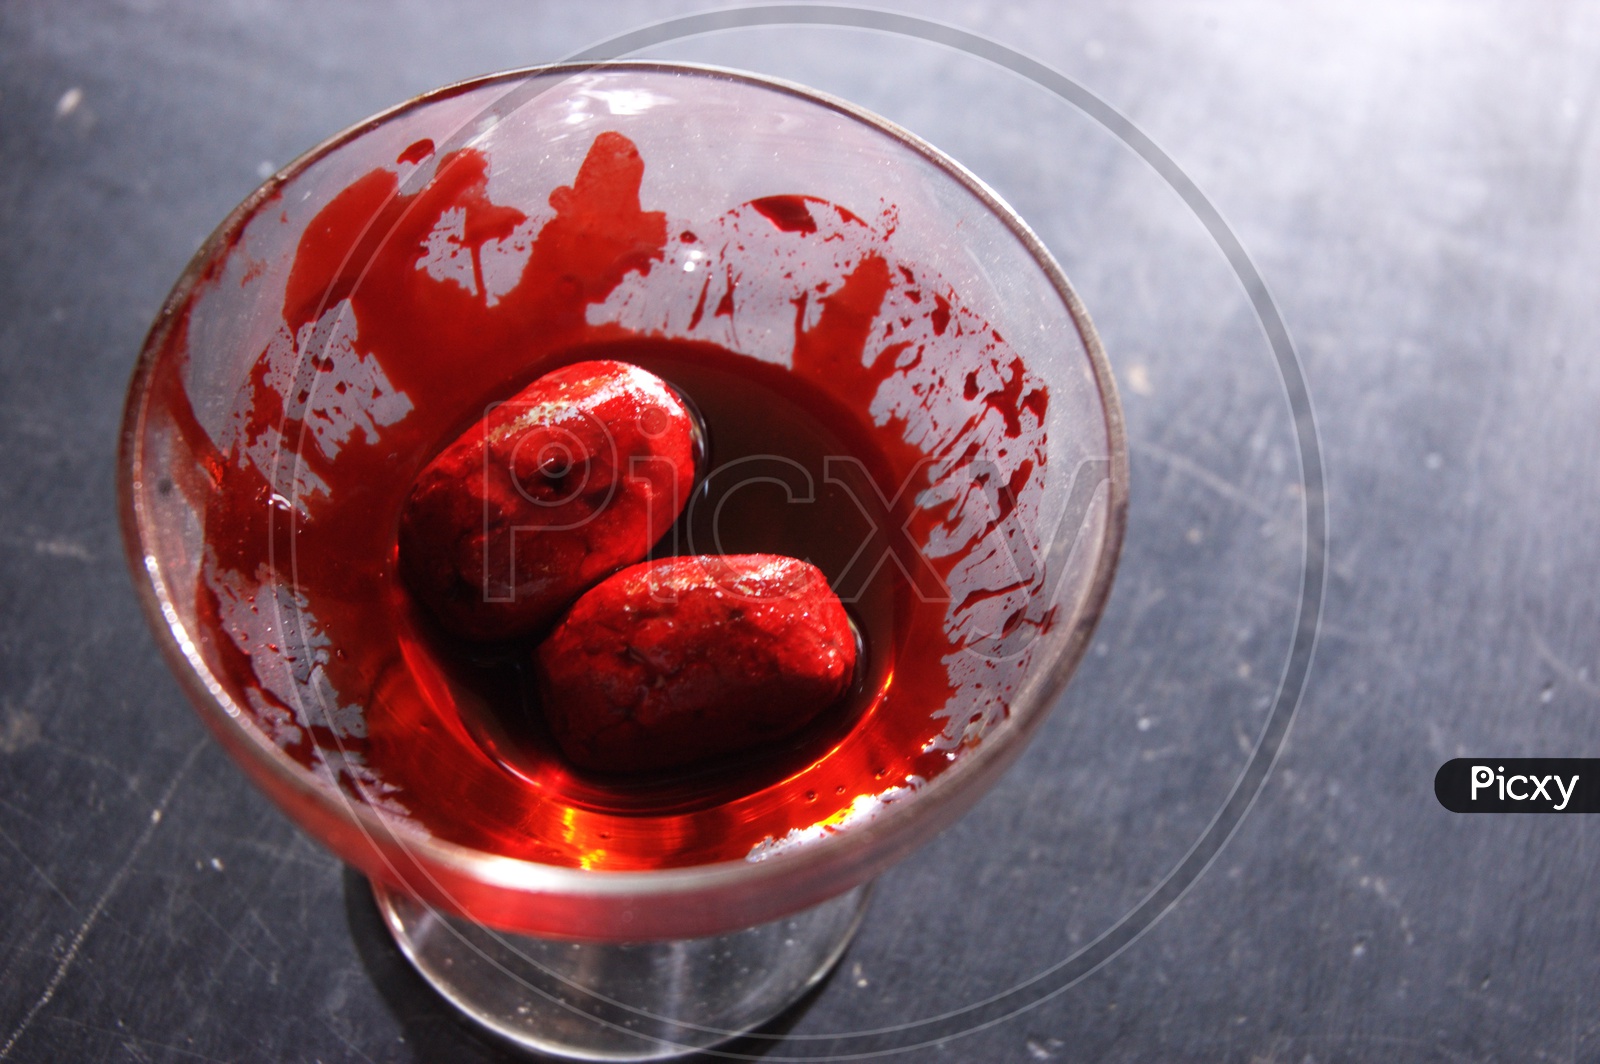 A glass filled with red liquid which looks like blood - Movie scene